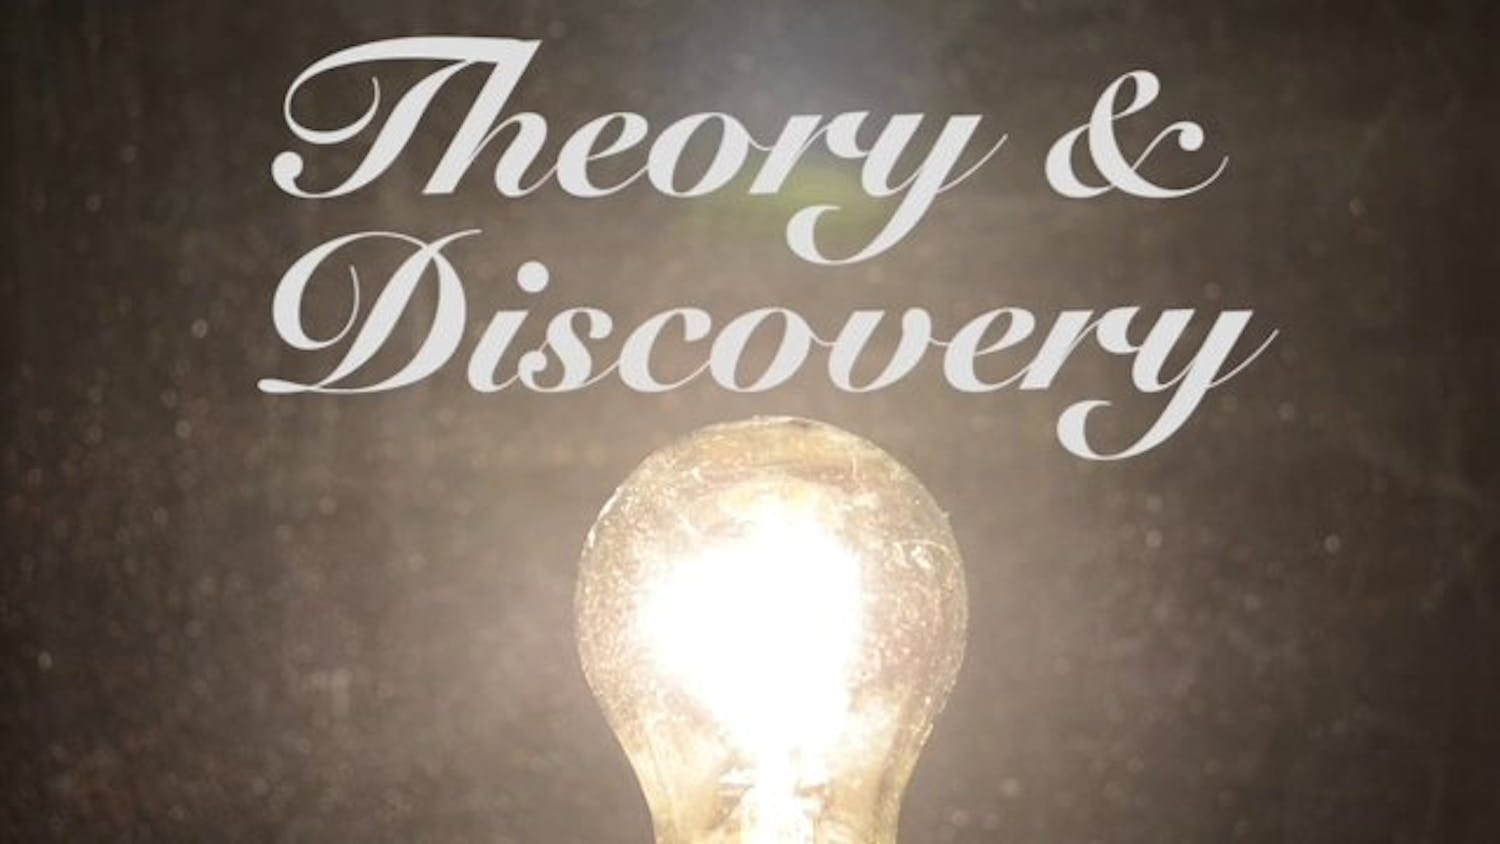 SPM's Theory and Discovery Issue comes out Sept. 17.